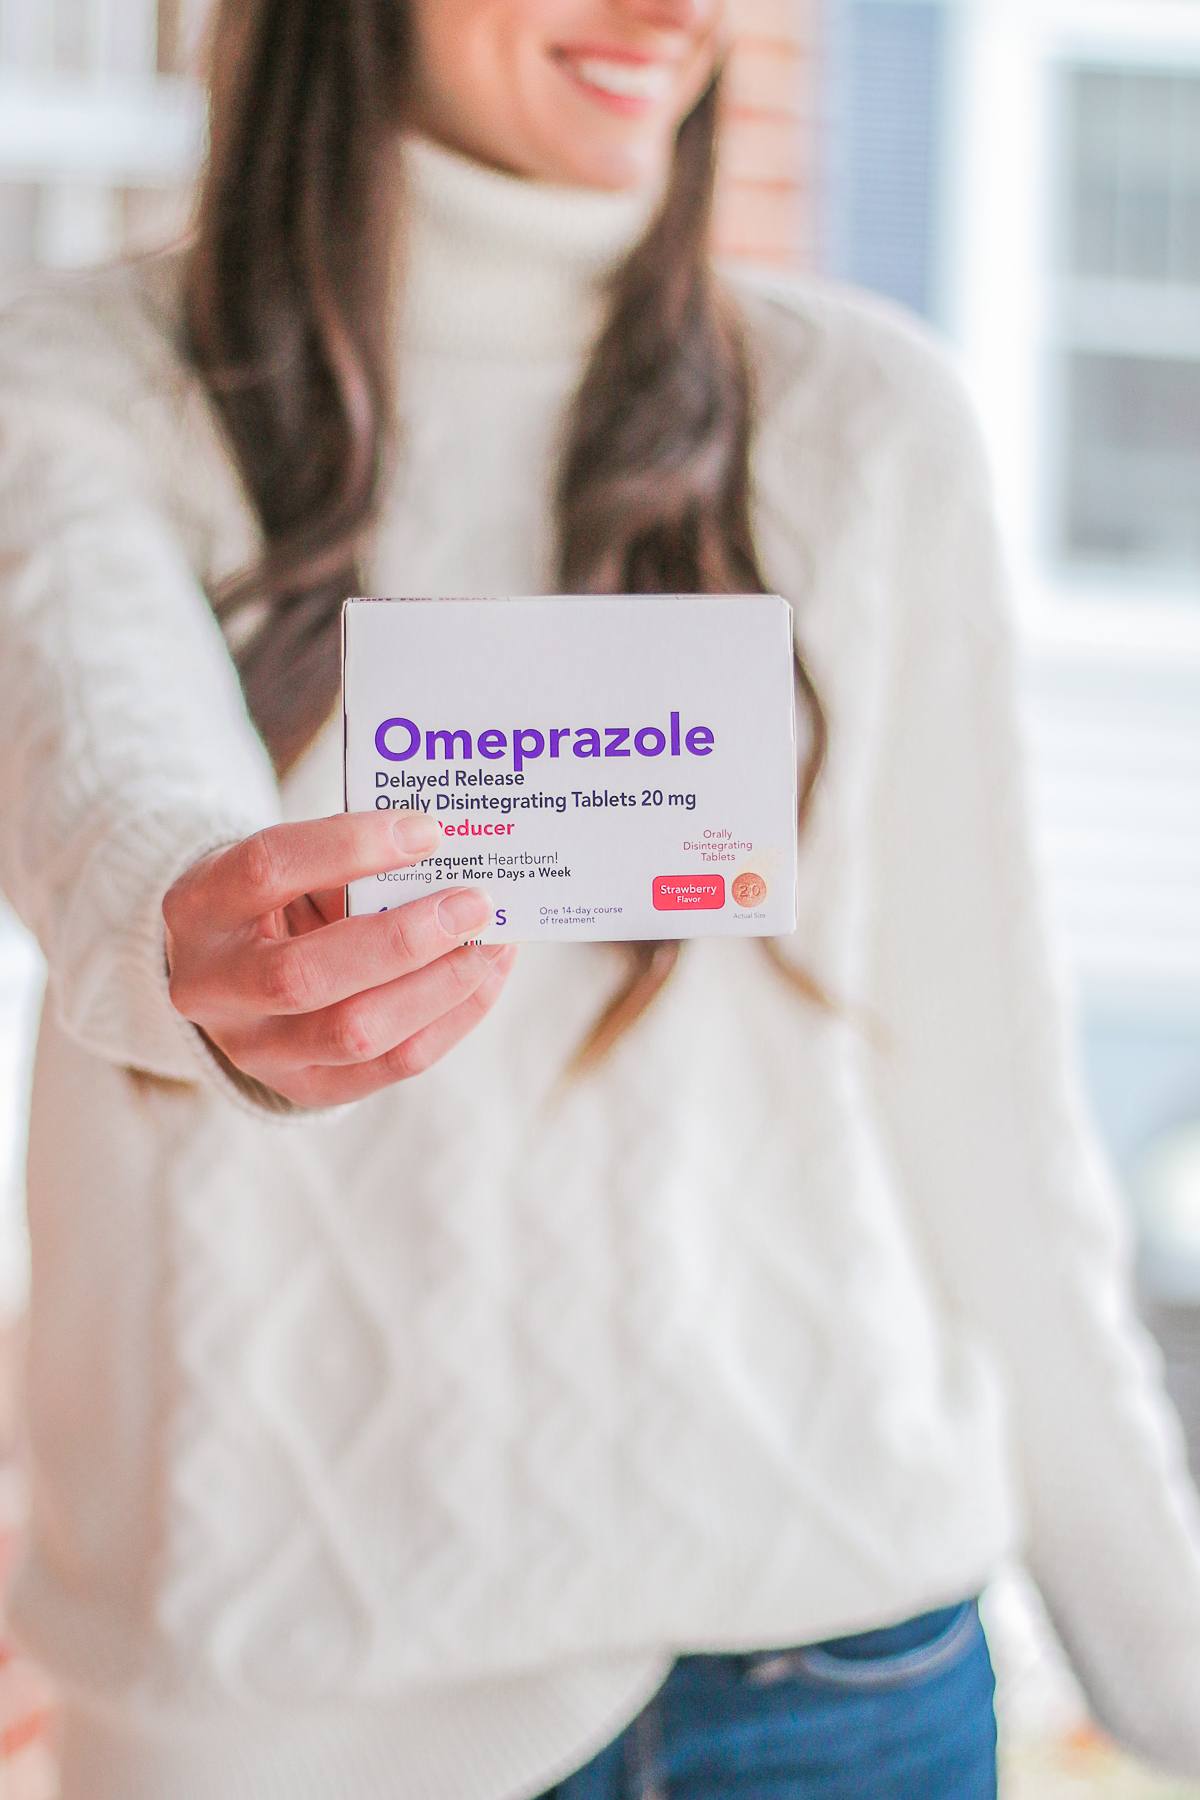 Basic Care Omeprazole ODT packaging photographed by blogger Stephanie Ziajka of Diary of a Debutante